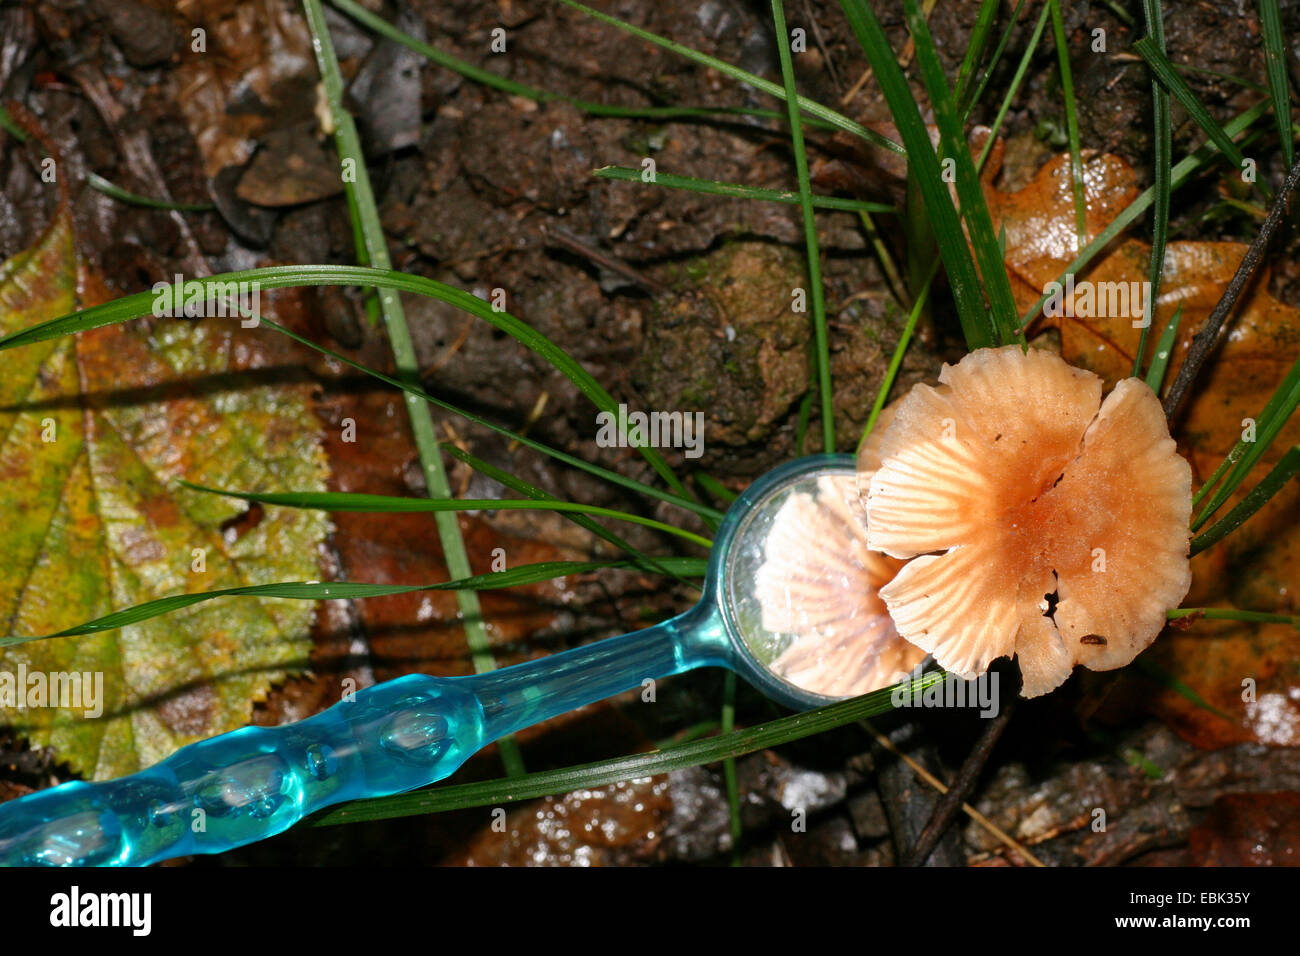 examination/determination of a mushroom in nature with a dentist's mirror, Germany Stock Photo